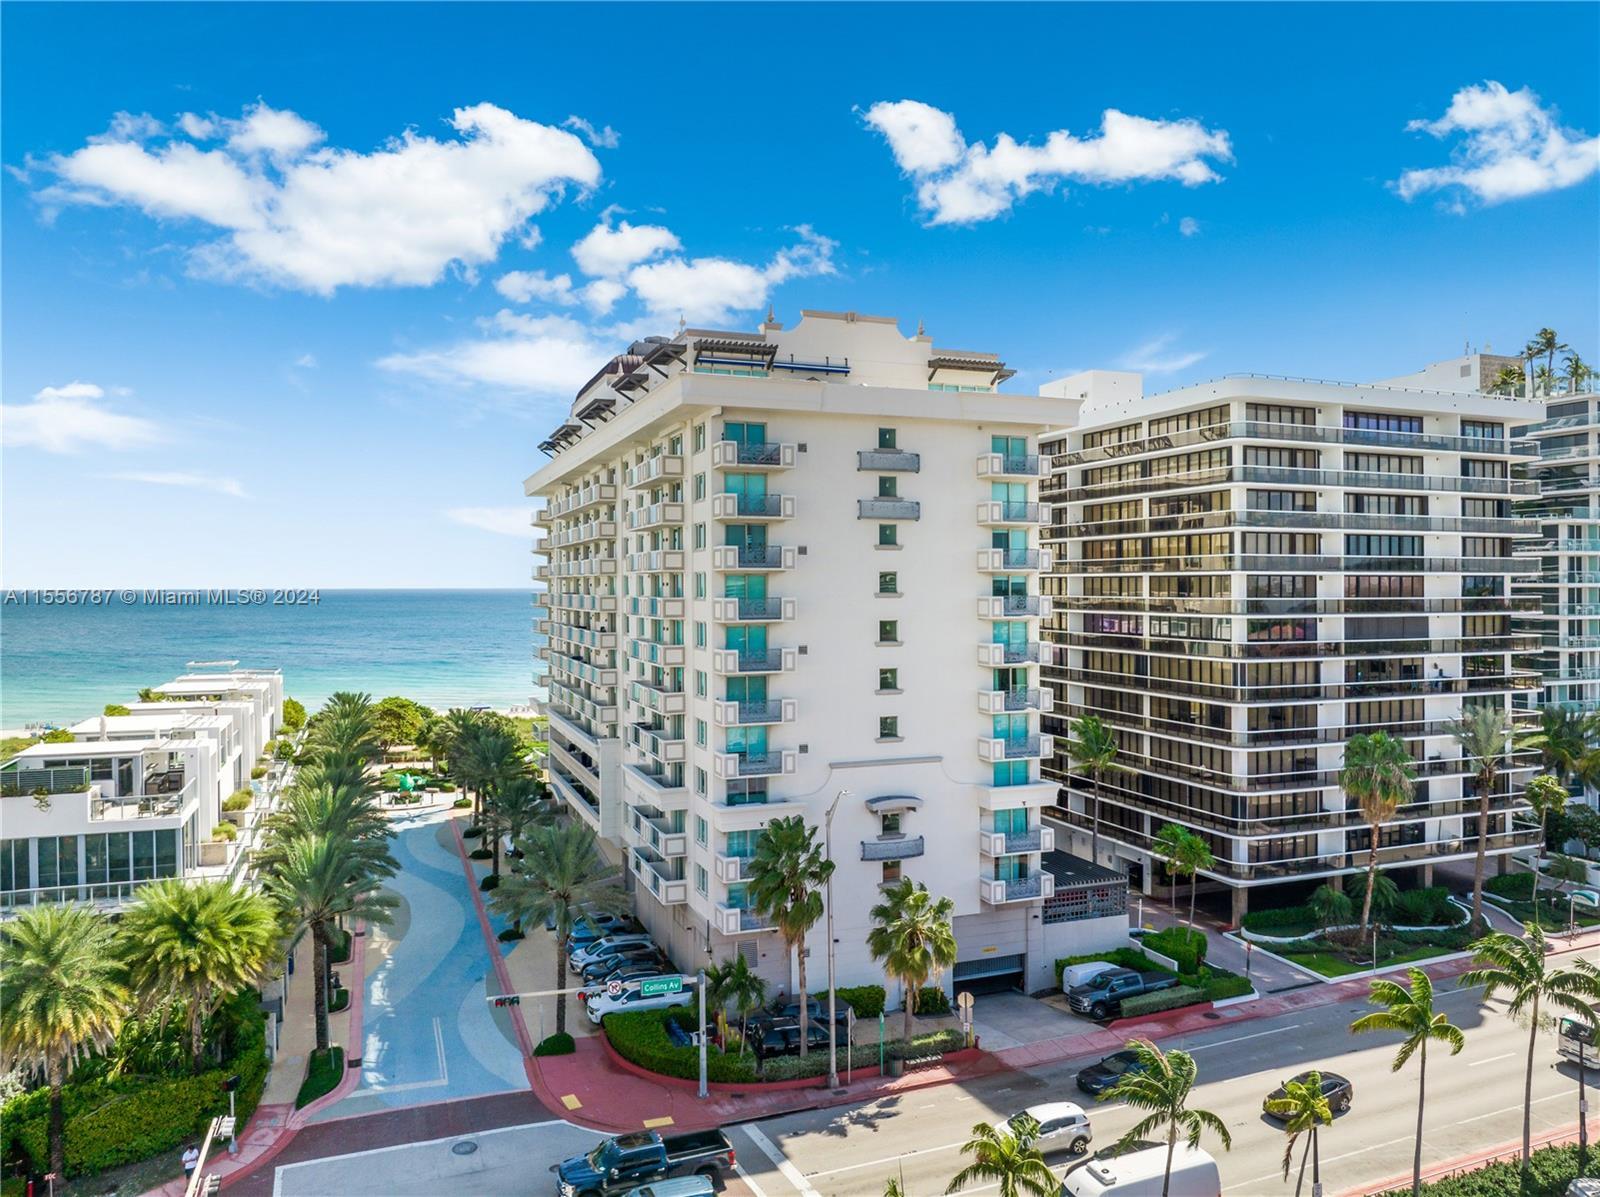 Photo of 9499 Collins Ave #406 in Surfside, FL